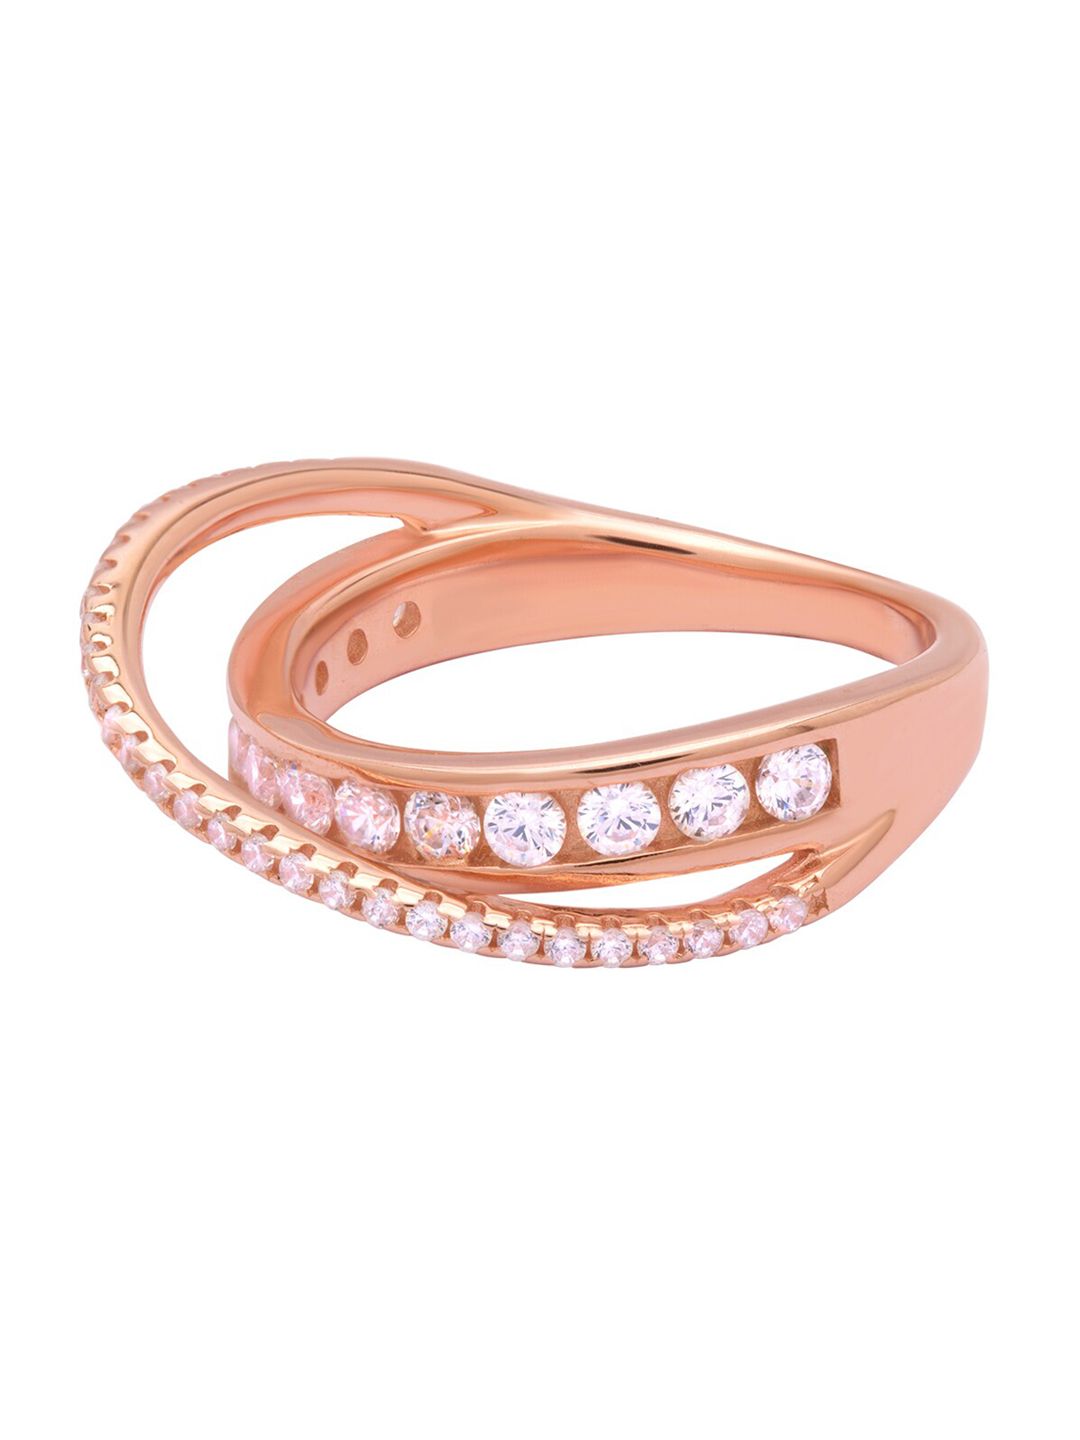 ANAYRA Women White & Rose Gold-Toned 925 Sterling Silver Ring Price in India